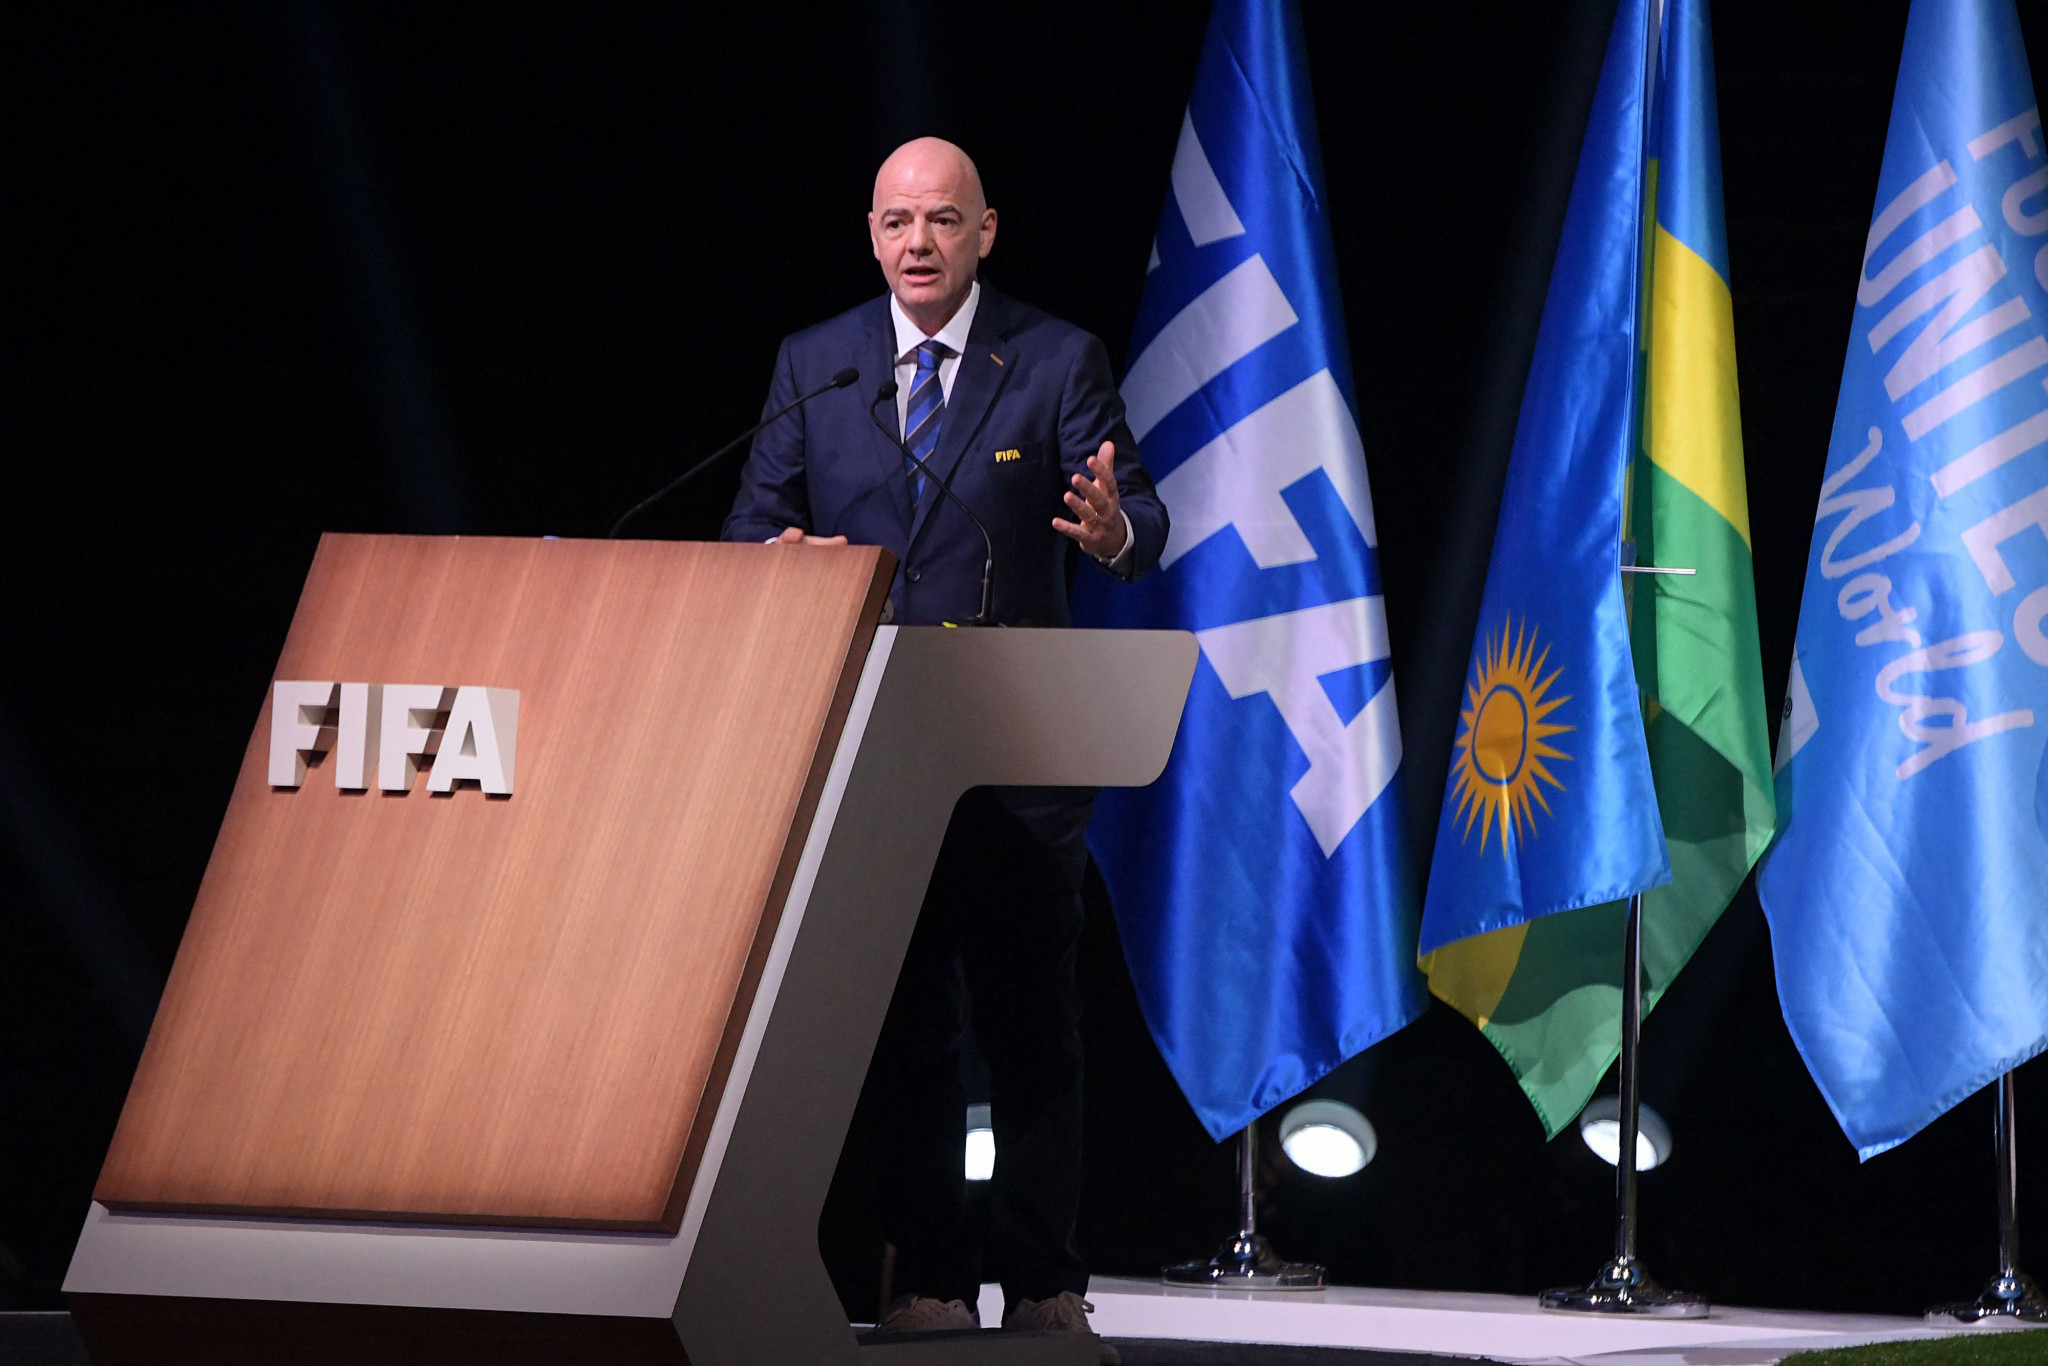 Infantino re-elected again as FIFA President by acclamation